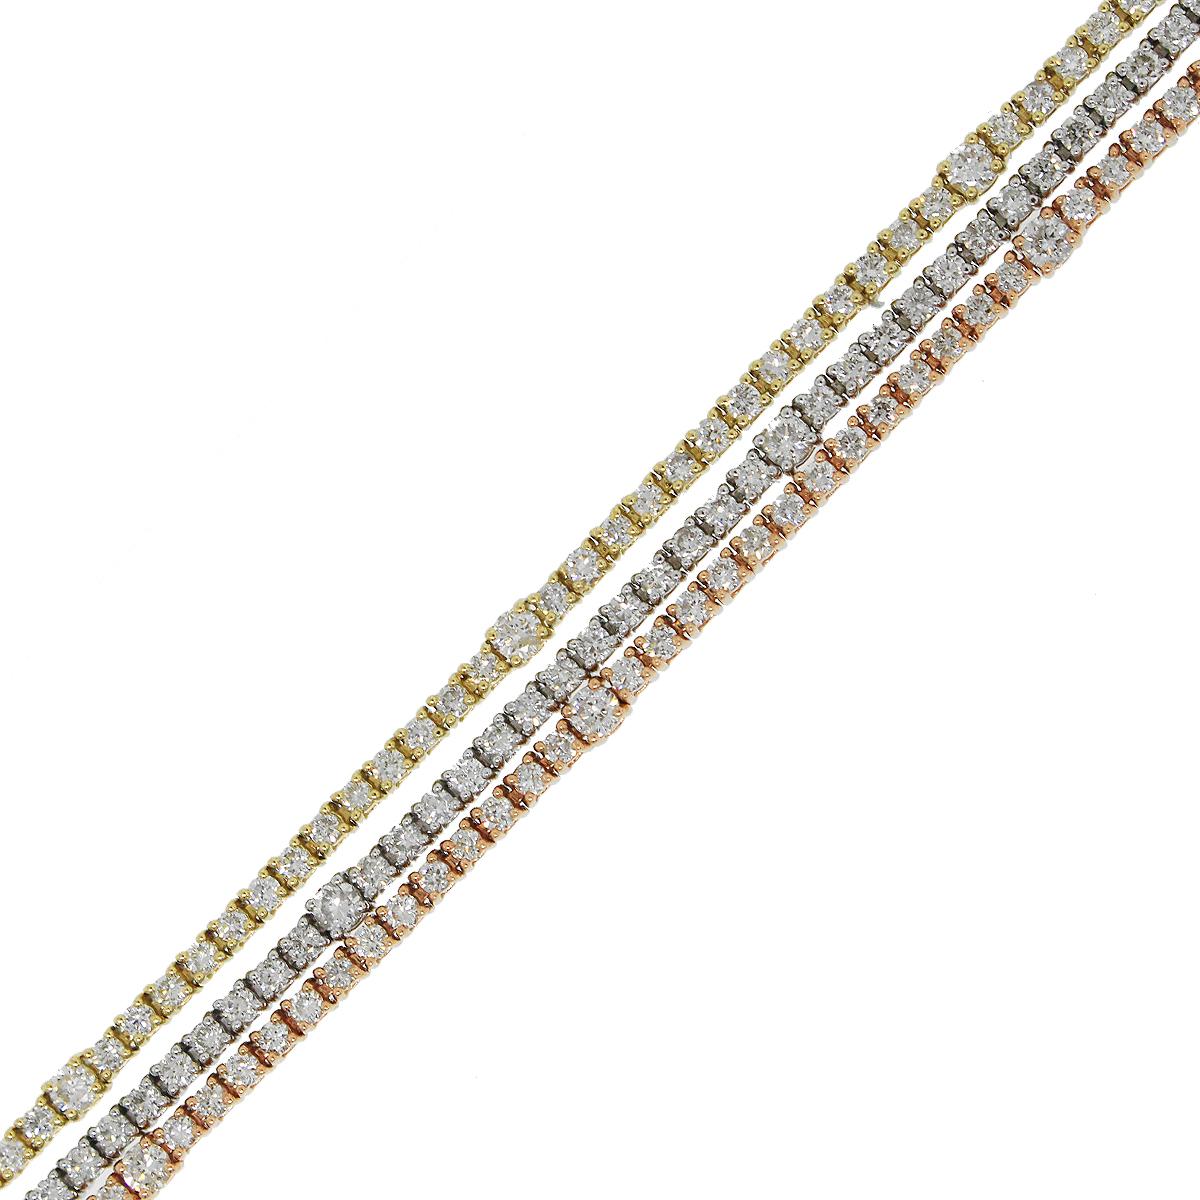 Material: 18k White Gold, 18k Rose Gold, 18k Yellow Gold
Diamond Details: Approximately 5.31ctw round brilliant diamonds. Diamonds are H/I in color and SI1 in clarity.
Clasp: Tongue in box clasp with safety latch
Total Weight: 18.4g